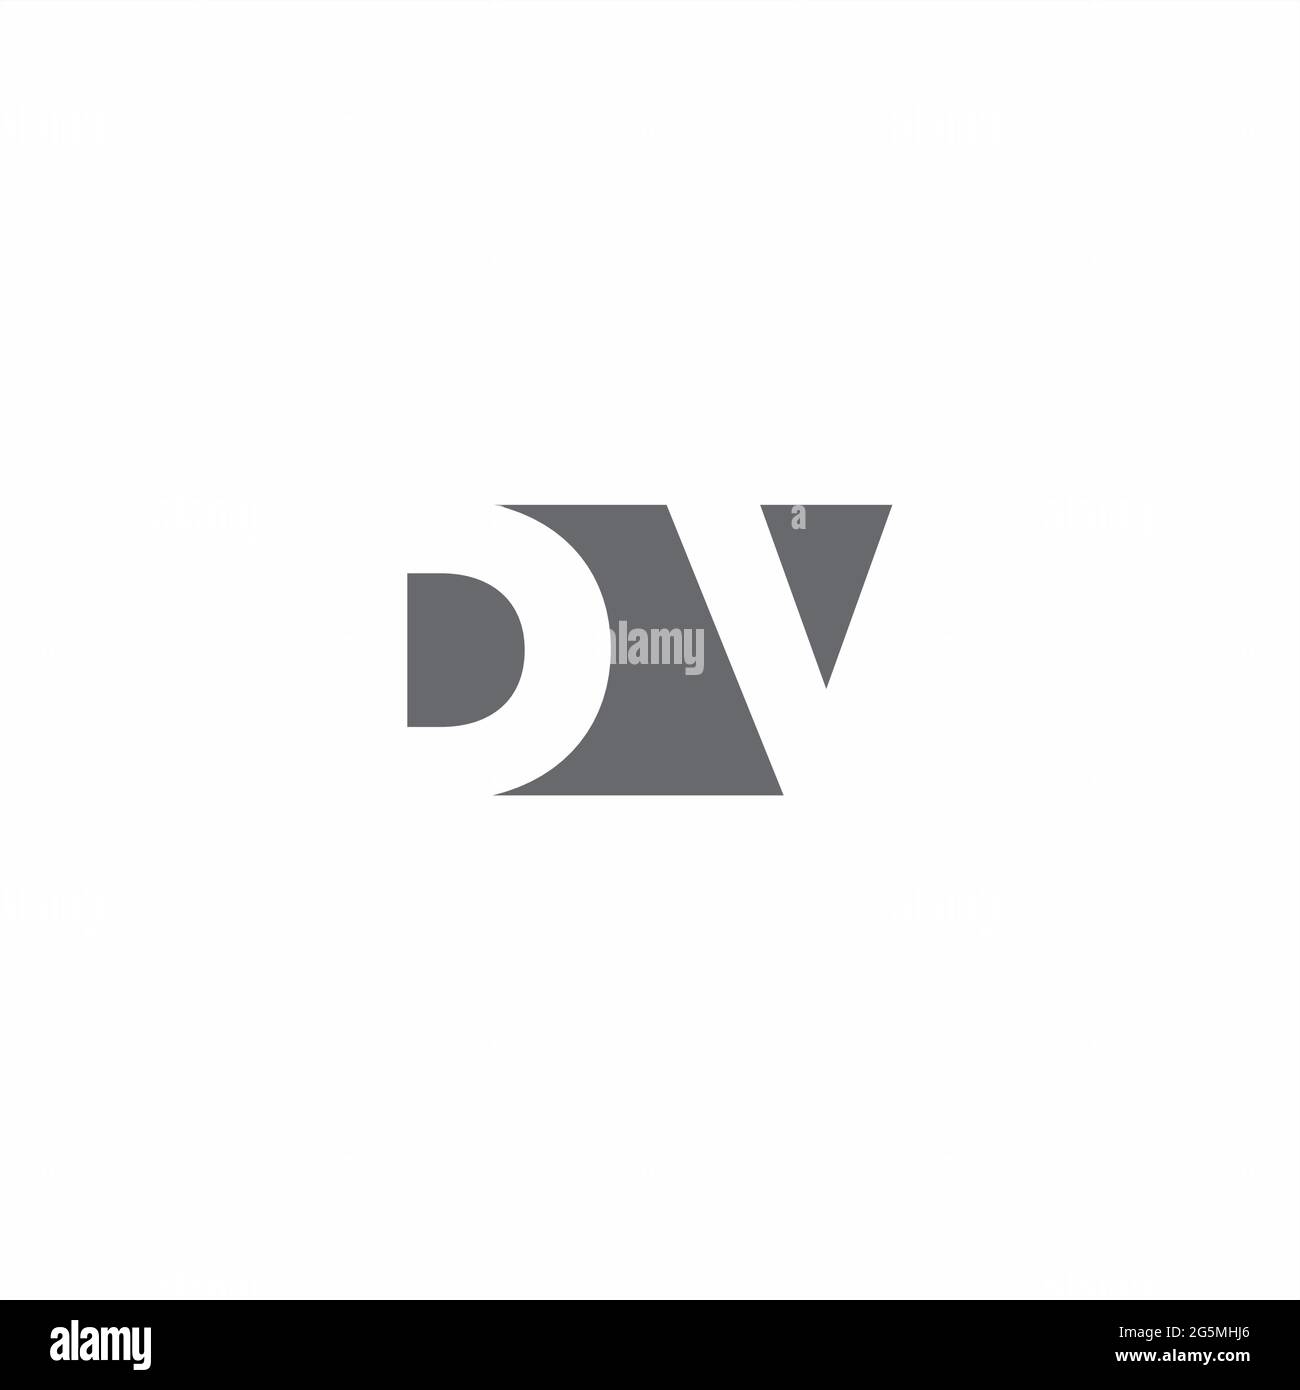 DV Logo monogram with negative space style design template isolated on